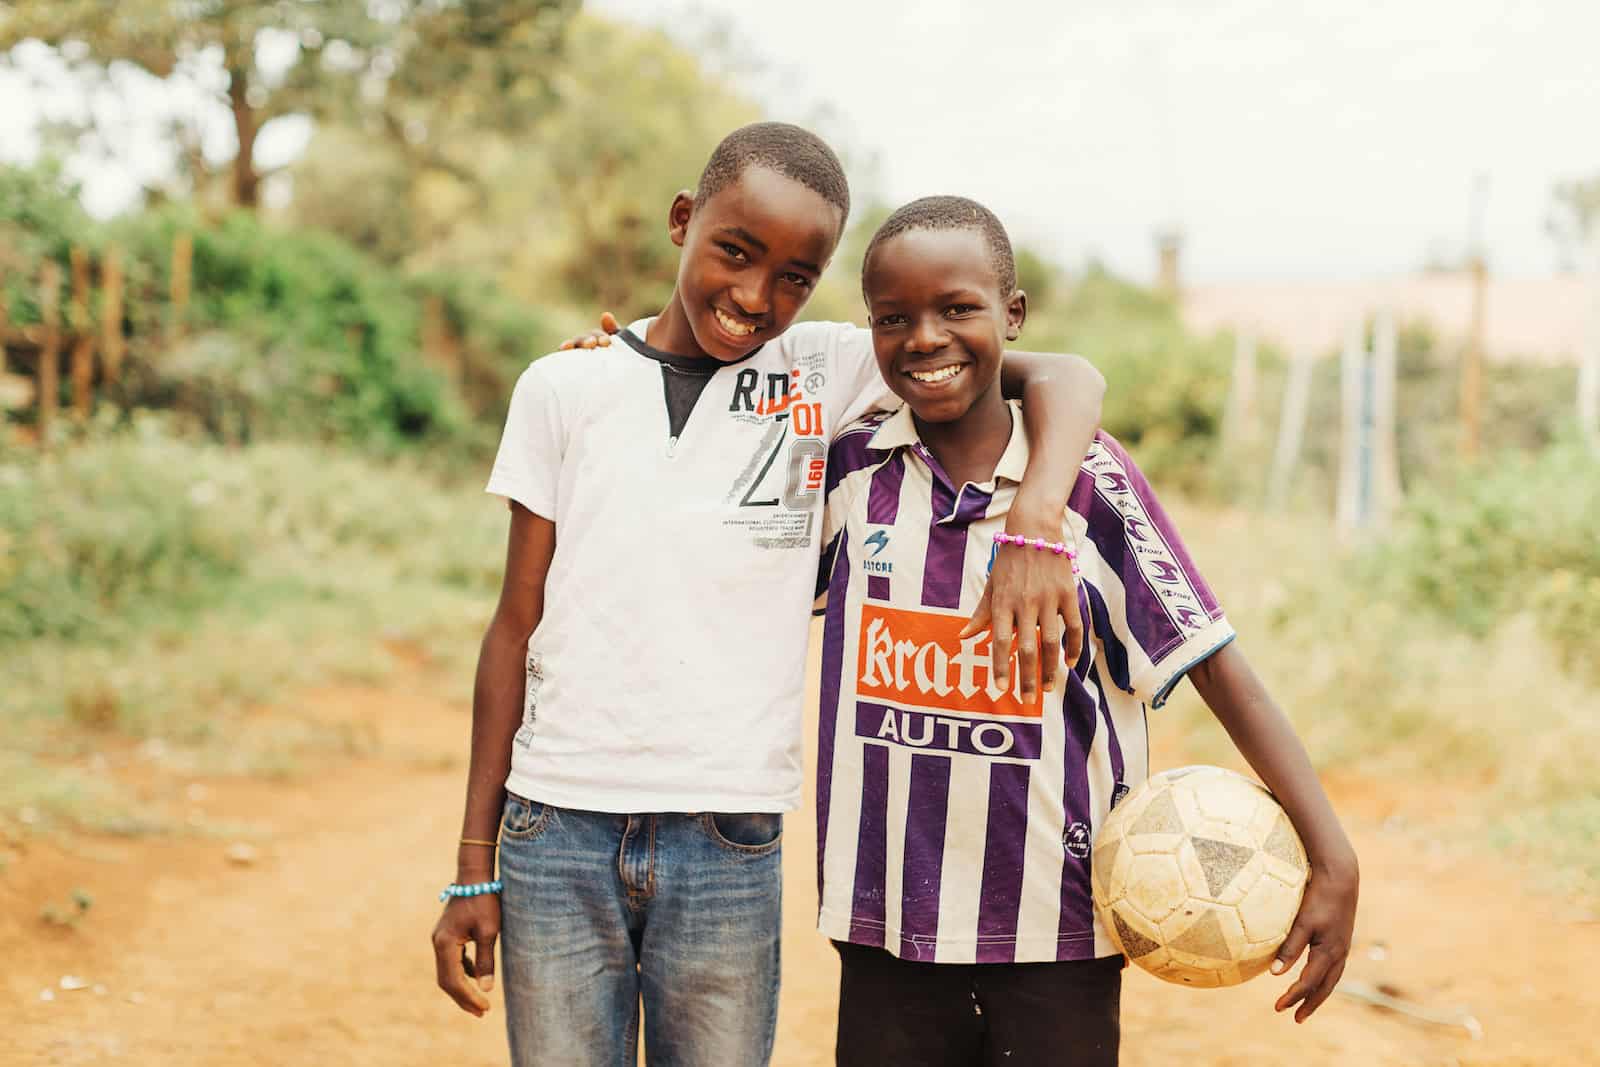 Two boys smile, one holding a soccer ball.